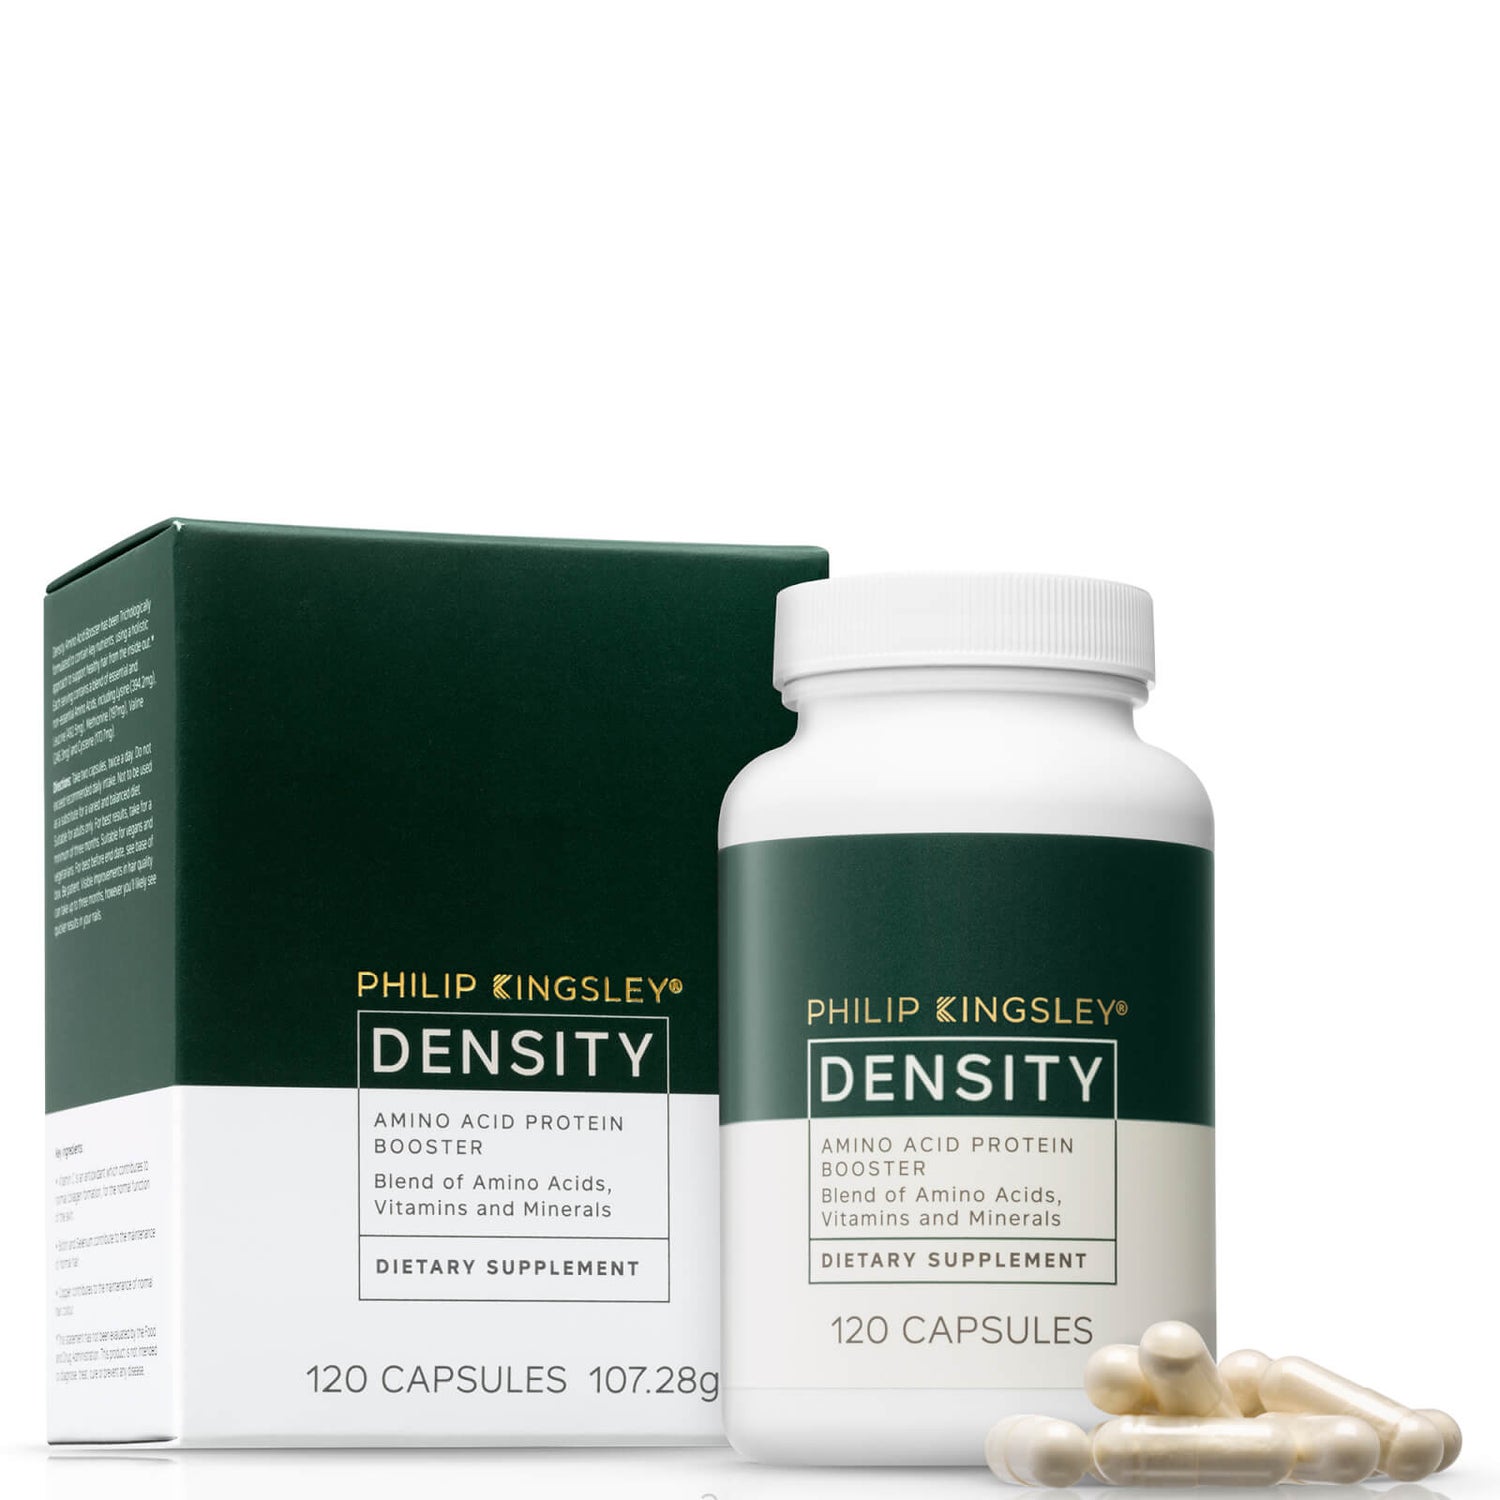 Philip Kingsley Density Amino Acid Protein Booster Supplement - 120 Capsules